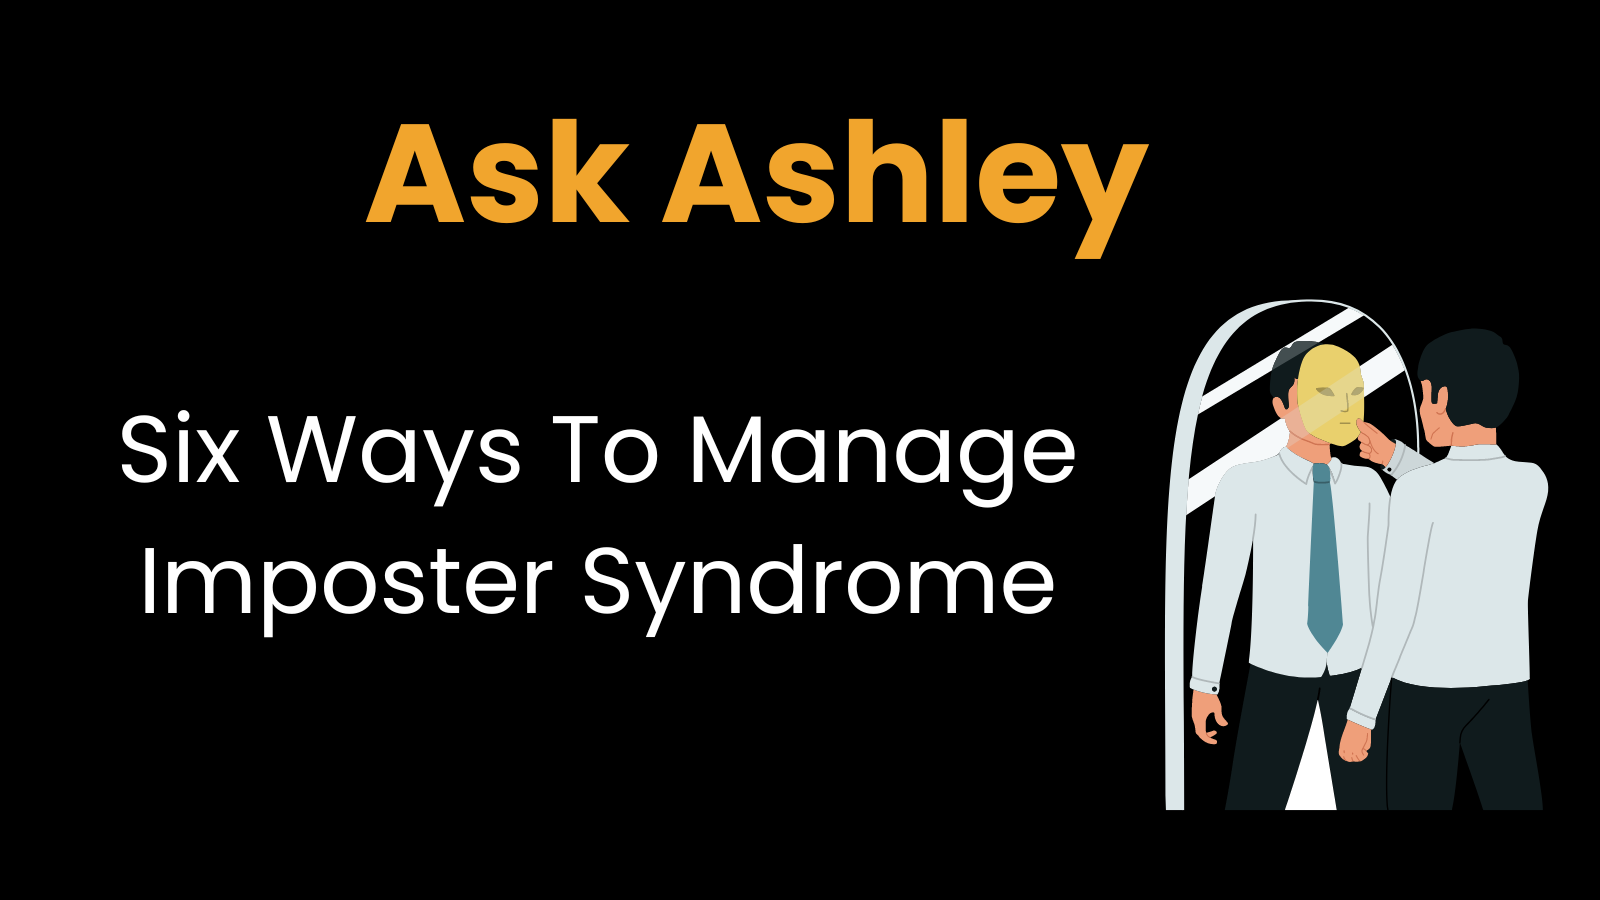 Six Ways To Manage Imposter Syndrome